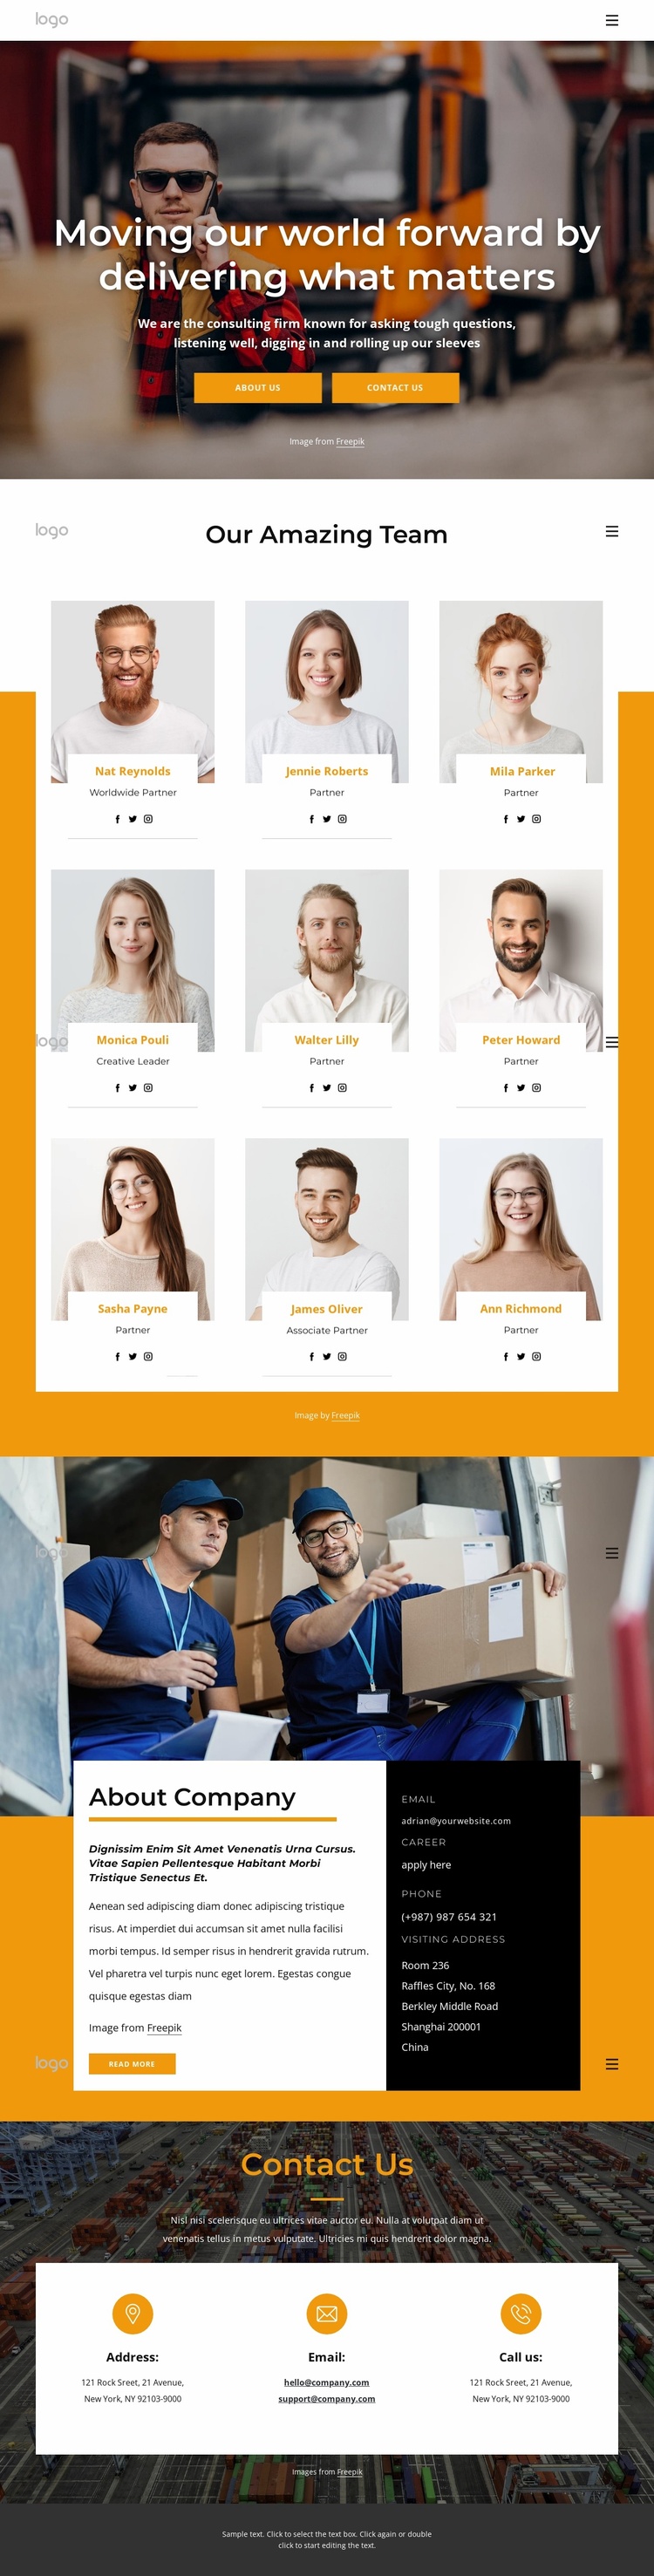 International parcel delivery company Landing Page